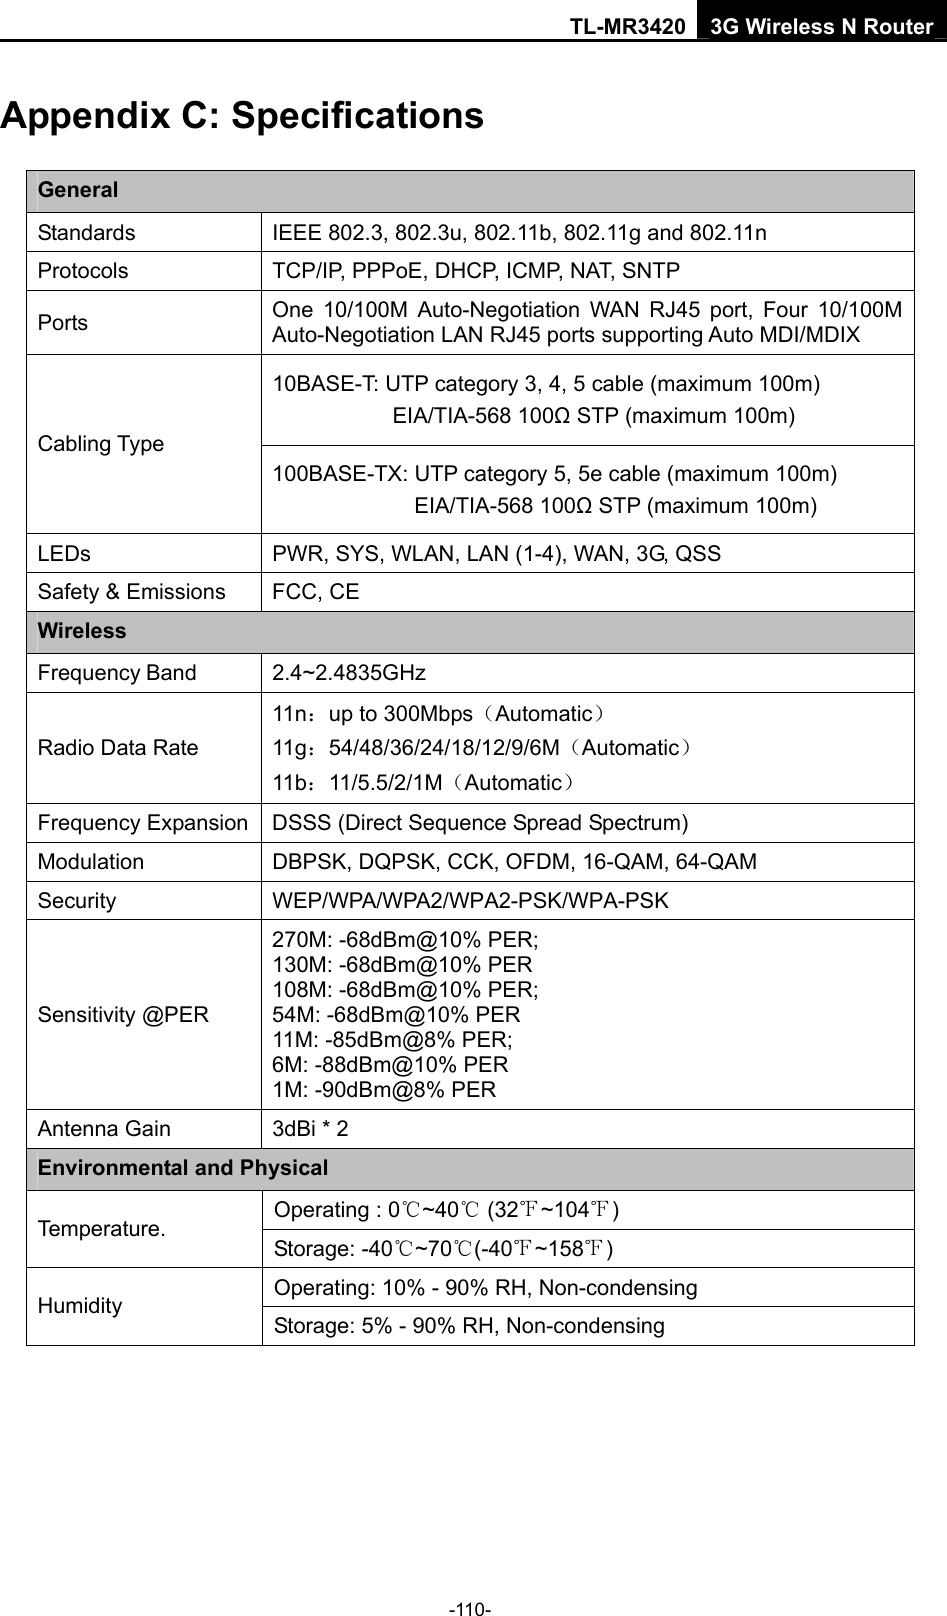 TL-MR3420 3G Wireless N Router -110- Appendix C: Specifications General Standards  IEEE 802.3, 802.3u, 802.11b, 802.11g and 802.11n Protocols  TCP/IP, PPPoE, DHCP, ICMP, NAT, SNTP Ports  One 10/100M Auto-Negotiation WAN RJ45 port, Four 10/100M Auto-Negotiation LAN RJ45 ports supporting Auto MDI/MDIX 10BASE-T: UTP category 3, 4, 5 cable (maximum 100m) EIA/TIA-568 100Ω STP (maximum 100m) Cabling Type 100BASE-TX: UTP category 5, 5e cable (maximum 100m) EIA/TIA-568 100Ω STP (maximum 100m) LEDs  PWR, SYS, WLAN, LAN (1-4), WAN, 3G, QSS Safety &amp; Emissions  FCC, CE Wireless Frequency Band 2.4~2.4835GHz Radio Data Rate 11n：up to 300Mbps（Automatic） 11g：54/48/36/24/18/12/9/6M（Automatic） 11b：11/5.5/2/1M（Automatic） Frequency Expansion  DSSS (Direct Sequence Spread Spectrum) Modulation  DBPSK, DQPSK, CCK, OFDM, 16-QAM, 64-QAM Security WEP/WPA/WPA2/WPA2-PSK/WPA-PSK Sensitivity @PER 270M: -68dBm@10% PER; 130M: -68dBm@10% PER 108M: -68dBm@10% PER;   54M: -68dBm@10% PER 11M: -85dBm@8% PER;   6M: -88dBm@10% PER 1M: -90dBm@8% PER Antenna Gain  3dBi * 2   Environmental and Physical Operating : 0℃~40℃ (32 ~104℉℉) Temperature.  Storage: -40℃~70℃(-40℉~158℉) Operating: 10% - 90% RH, Non-condensing Humidity  Storage: 5% - 90% RH, Non-condensing 